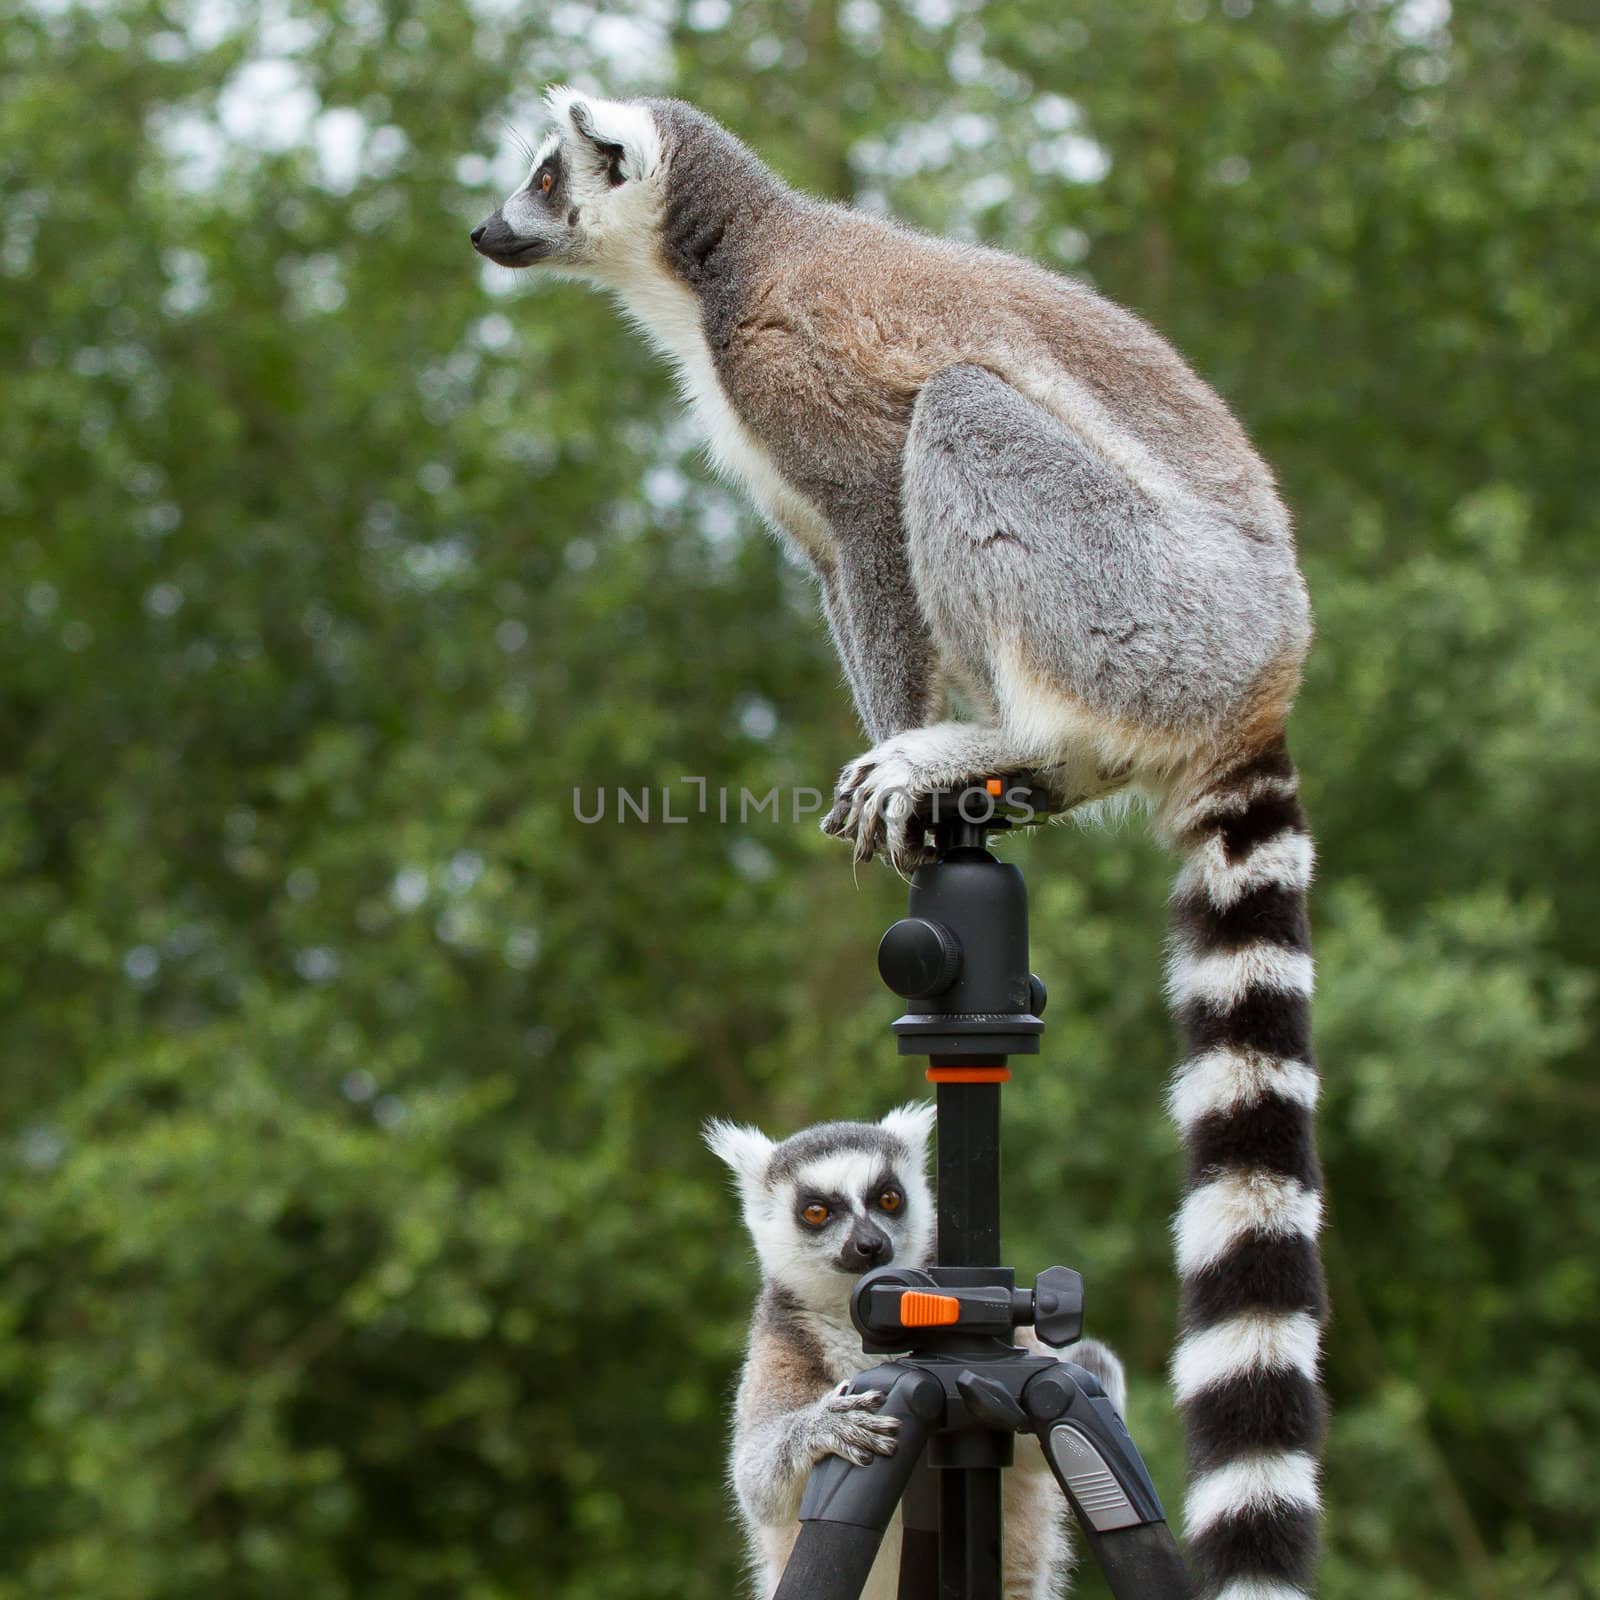 Ring-tailed lemur sitting on tripod by michaklootwijk